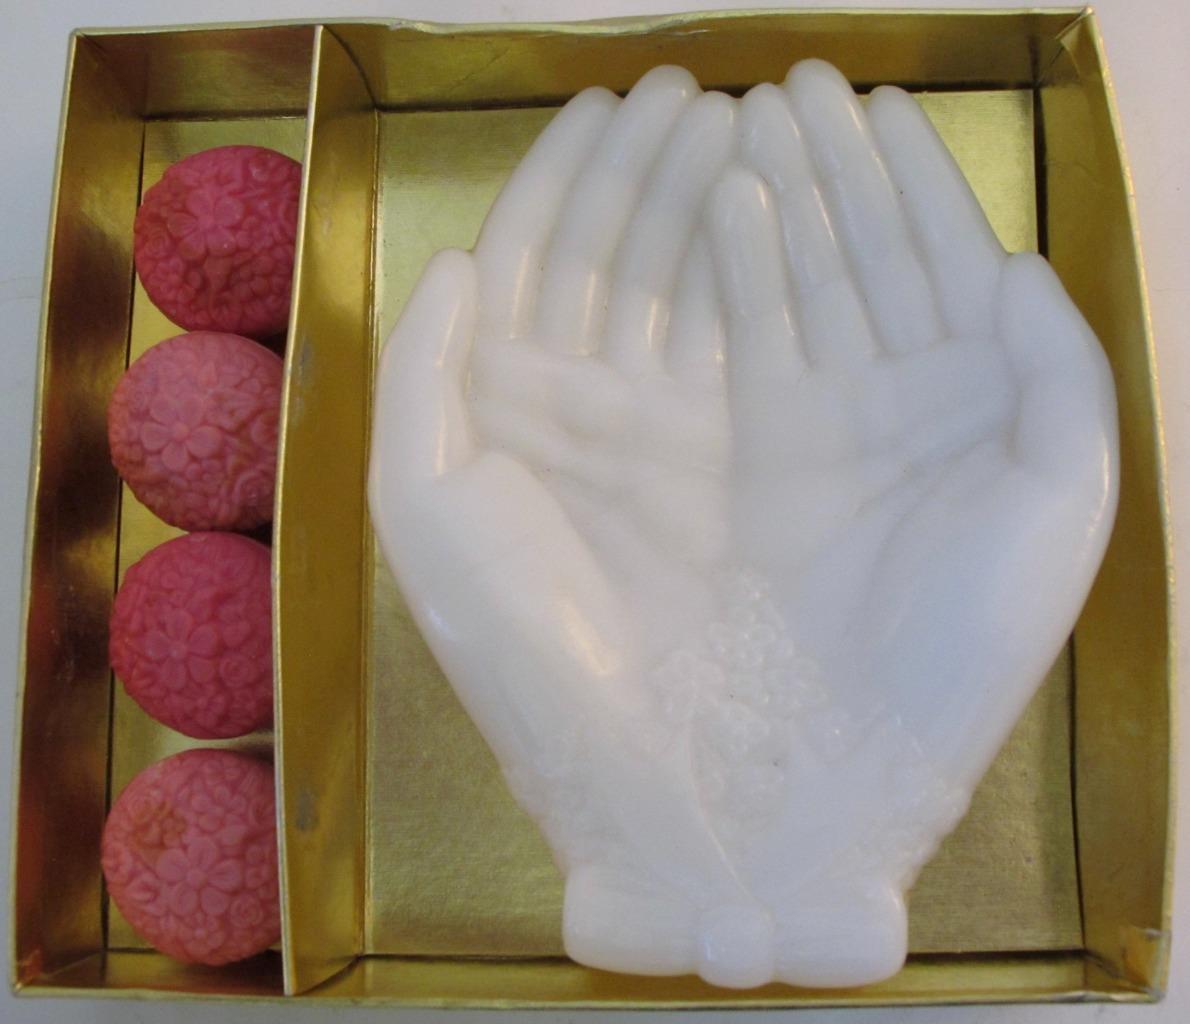 Vintage Avon Touch of Beauty Milk Glass Hands Soap Dish Pink Floral Guest Soaps - $15.99